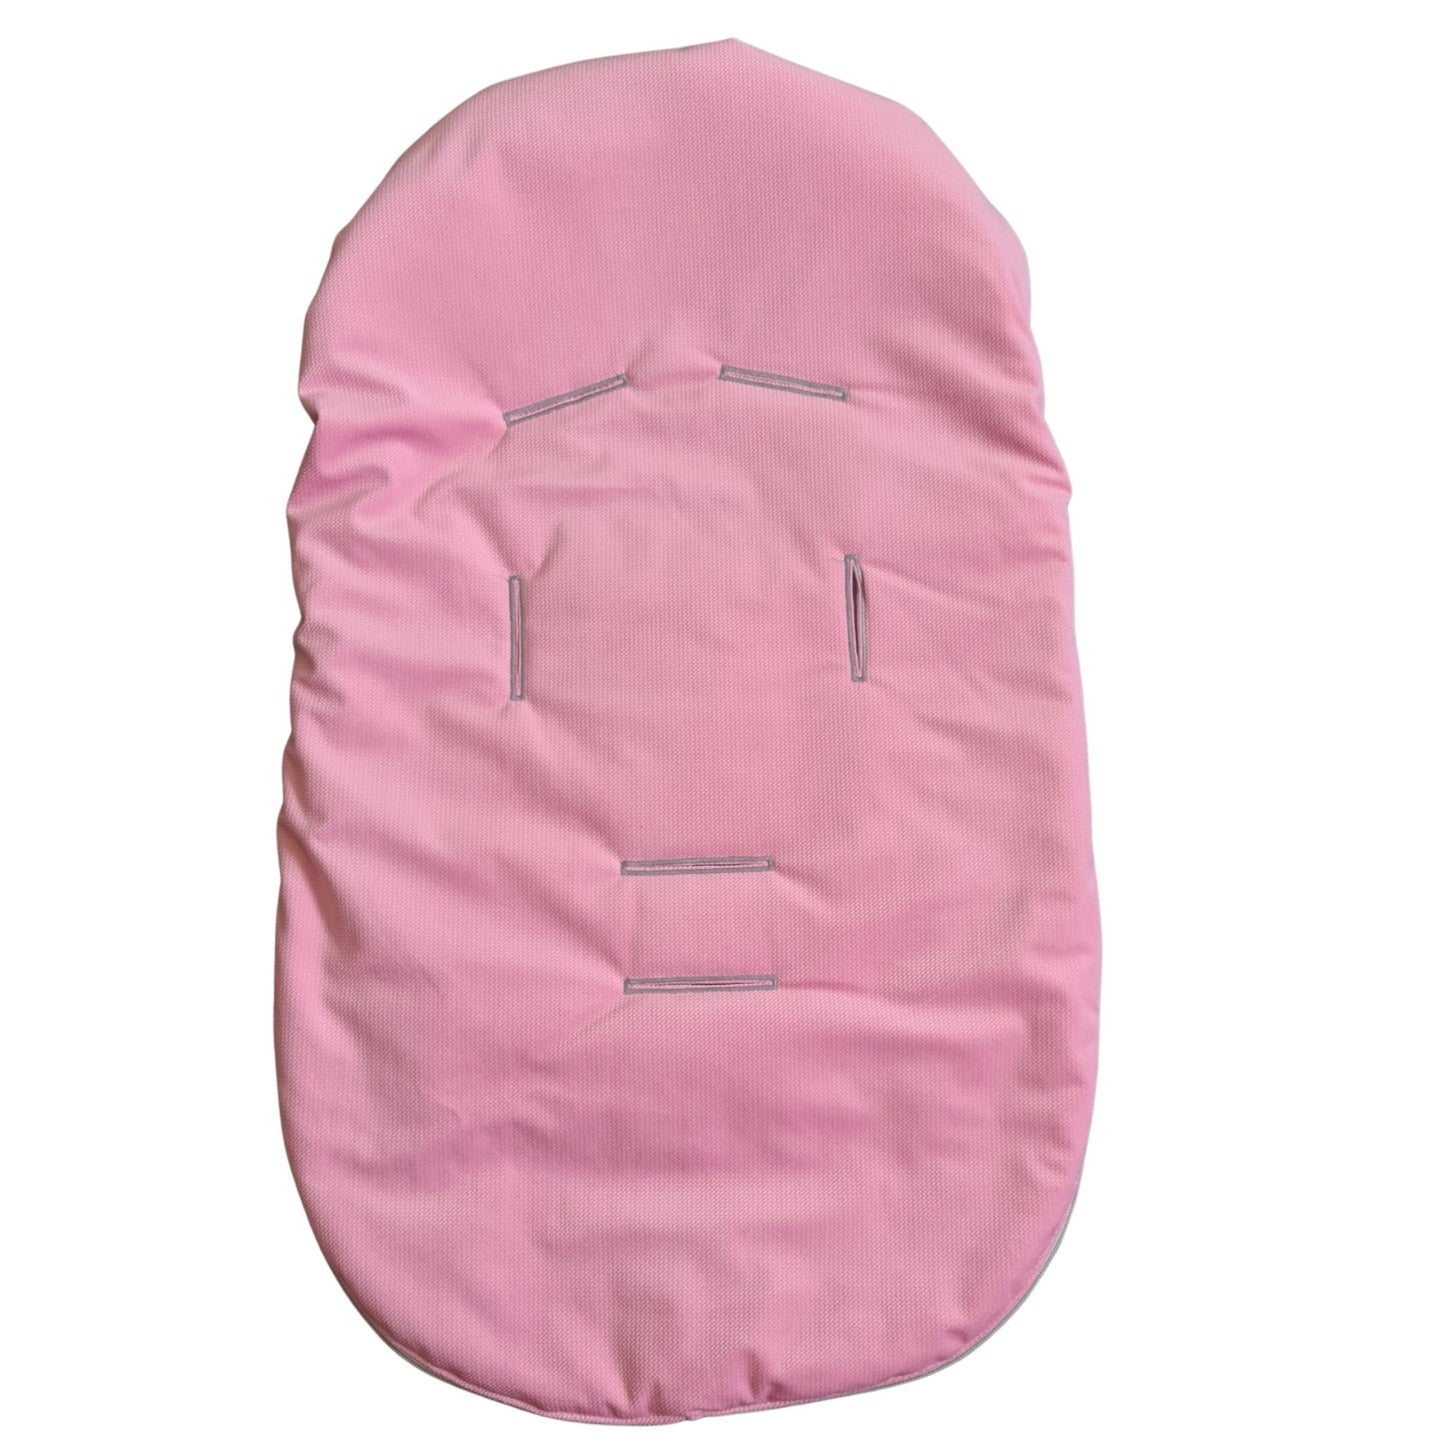 Reversible Footmuff for Buggy & Car Seat - Rainbow Girl